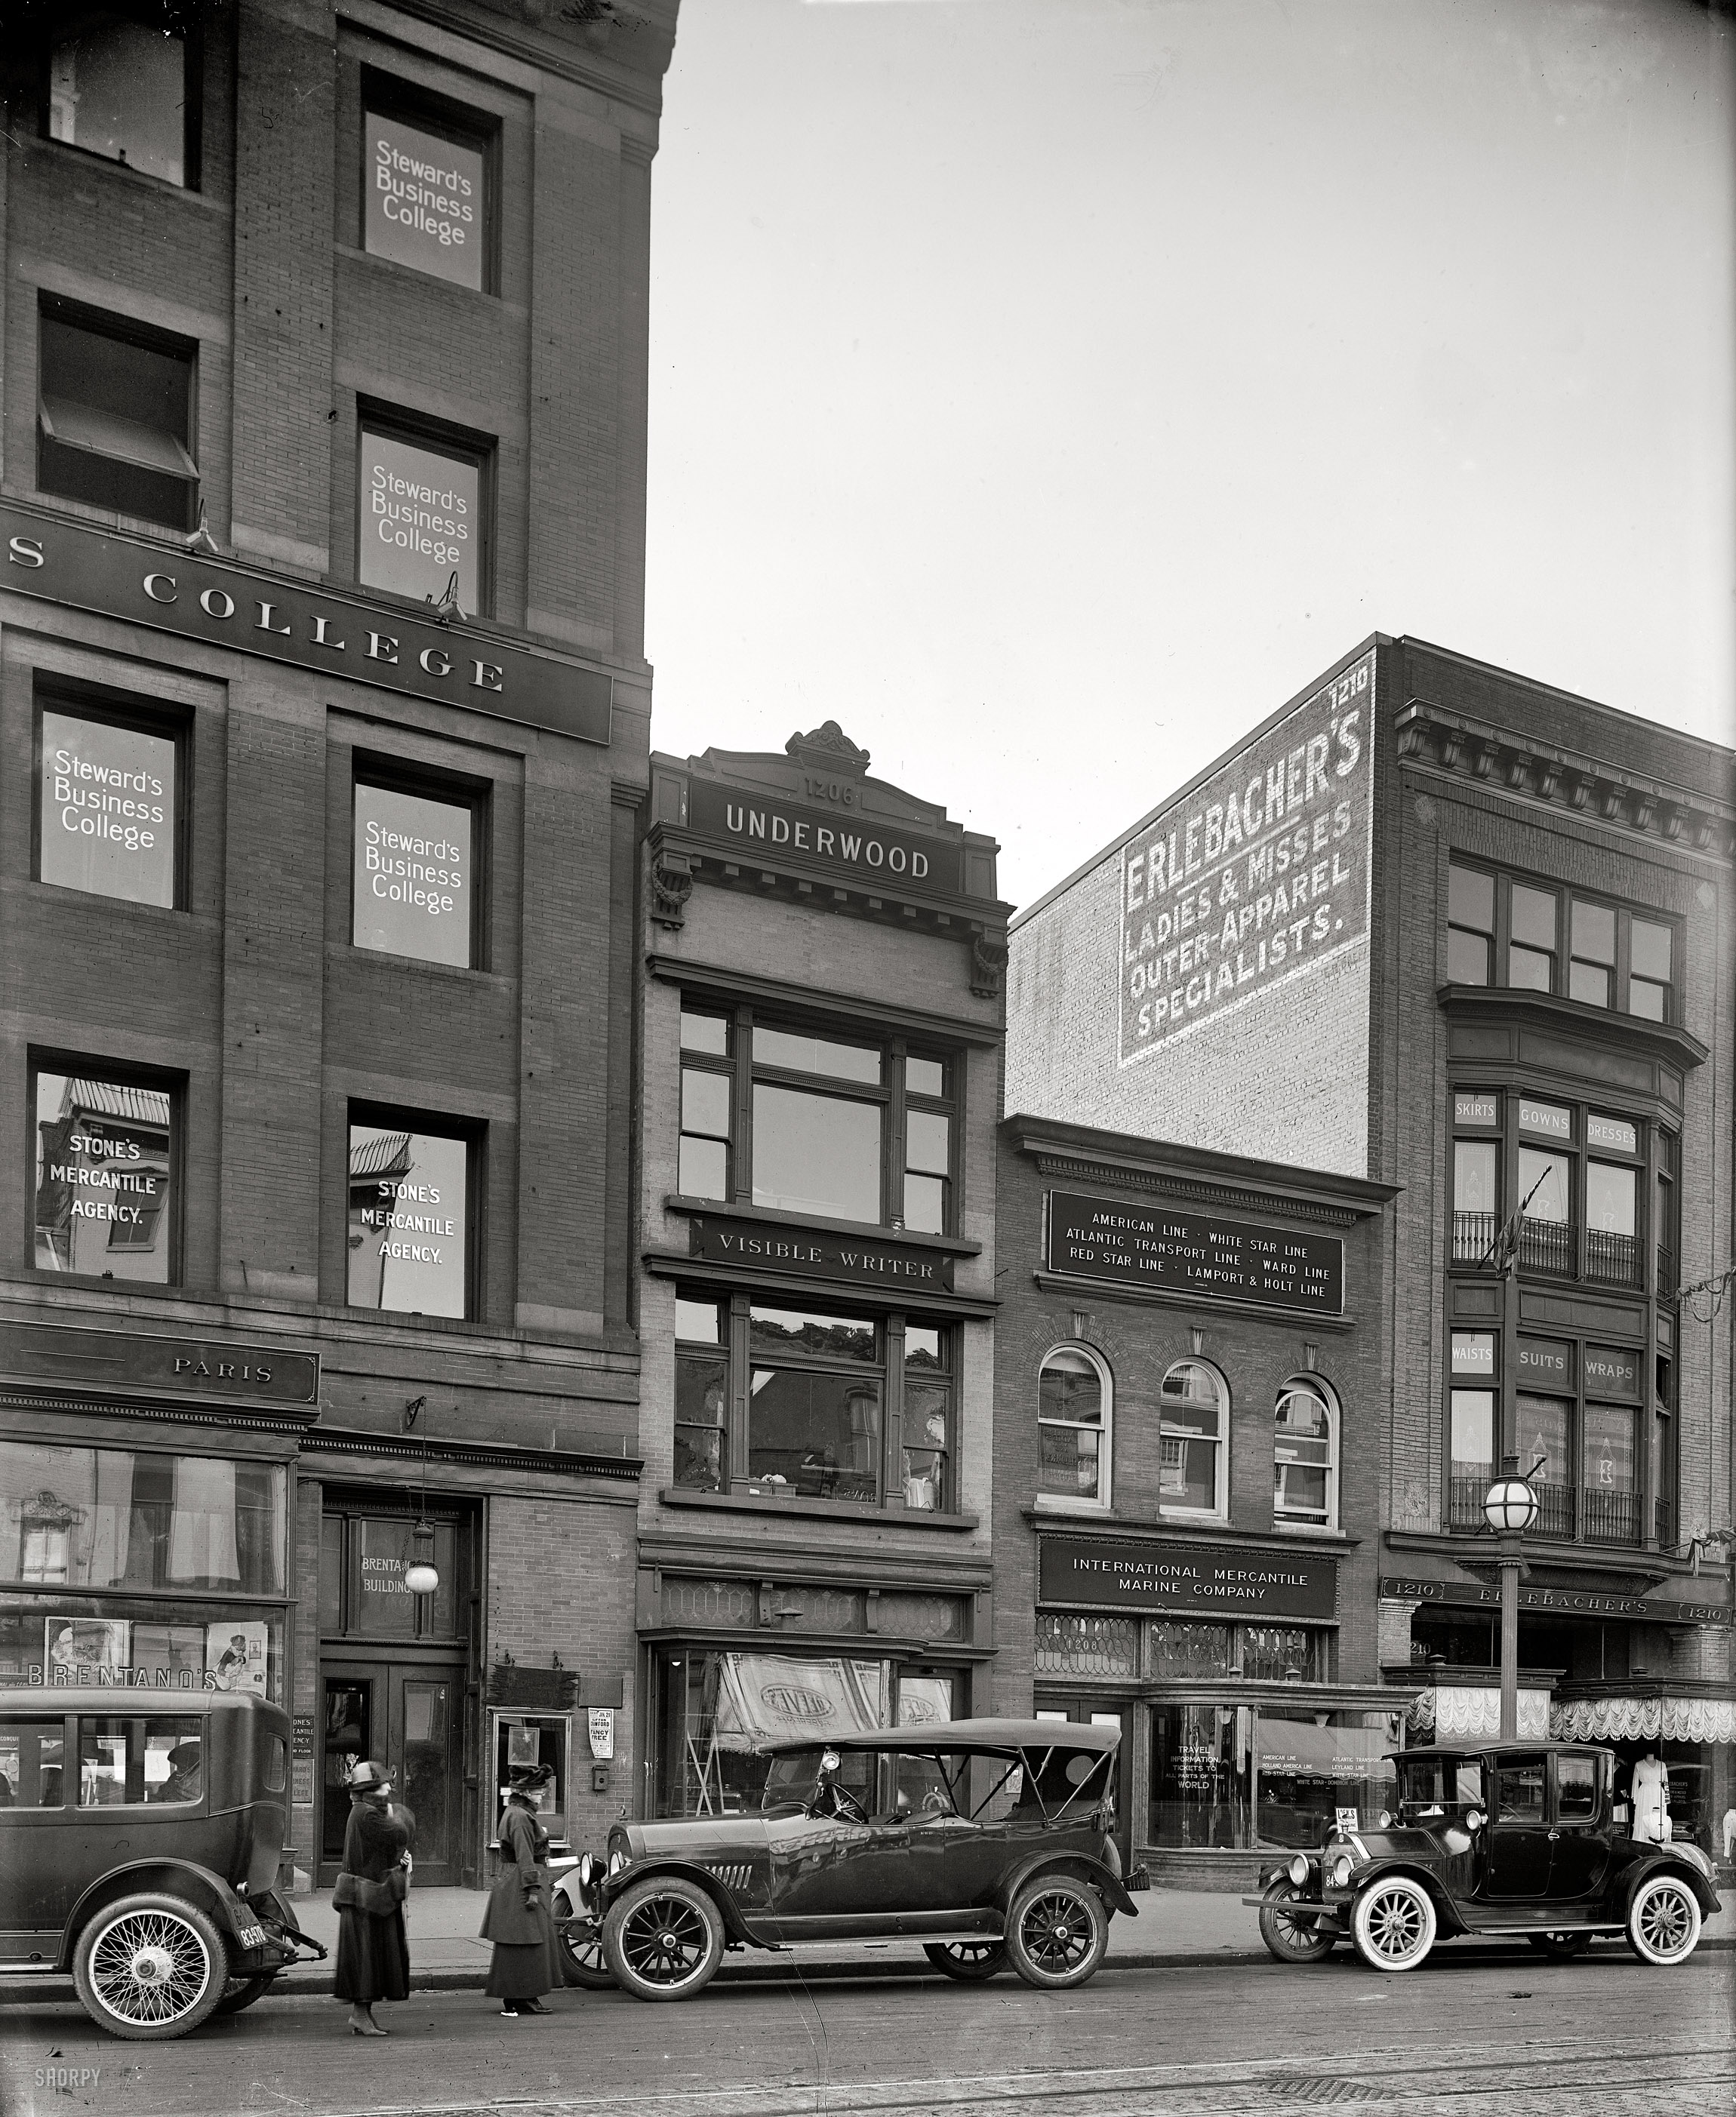 Washington, D.C., circa 1918. Another thrilling installment of "Emergency Fleet Corporation, building exterior." At center is the Underwood typewriter office at 1206 F Street N.W. Harris & Ewing Collection glass negative. View full size.